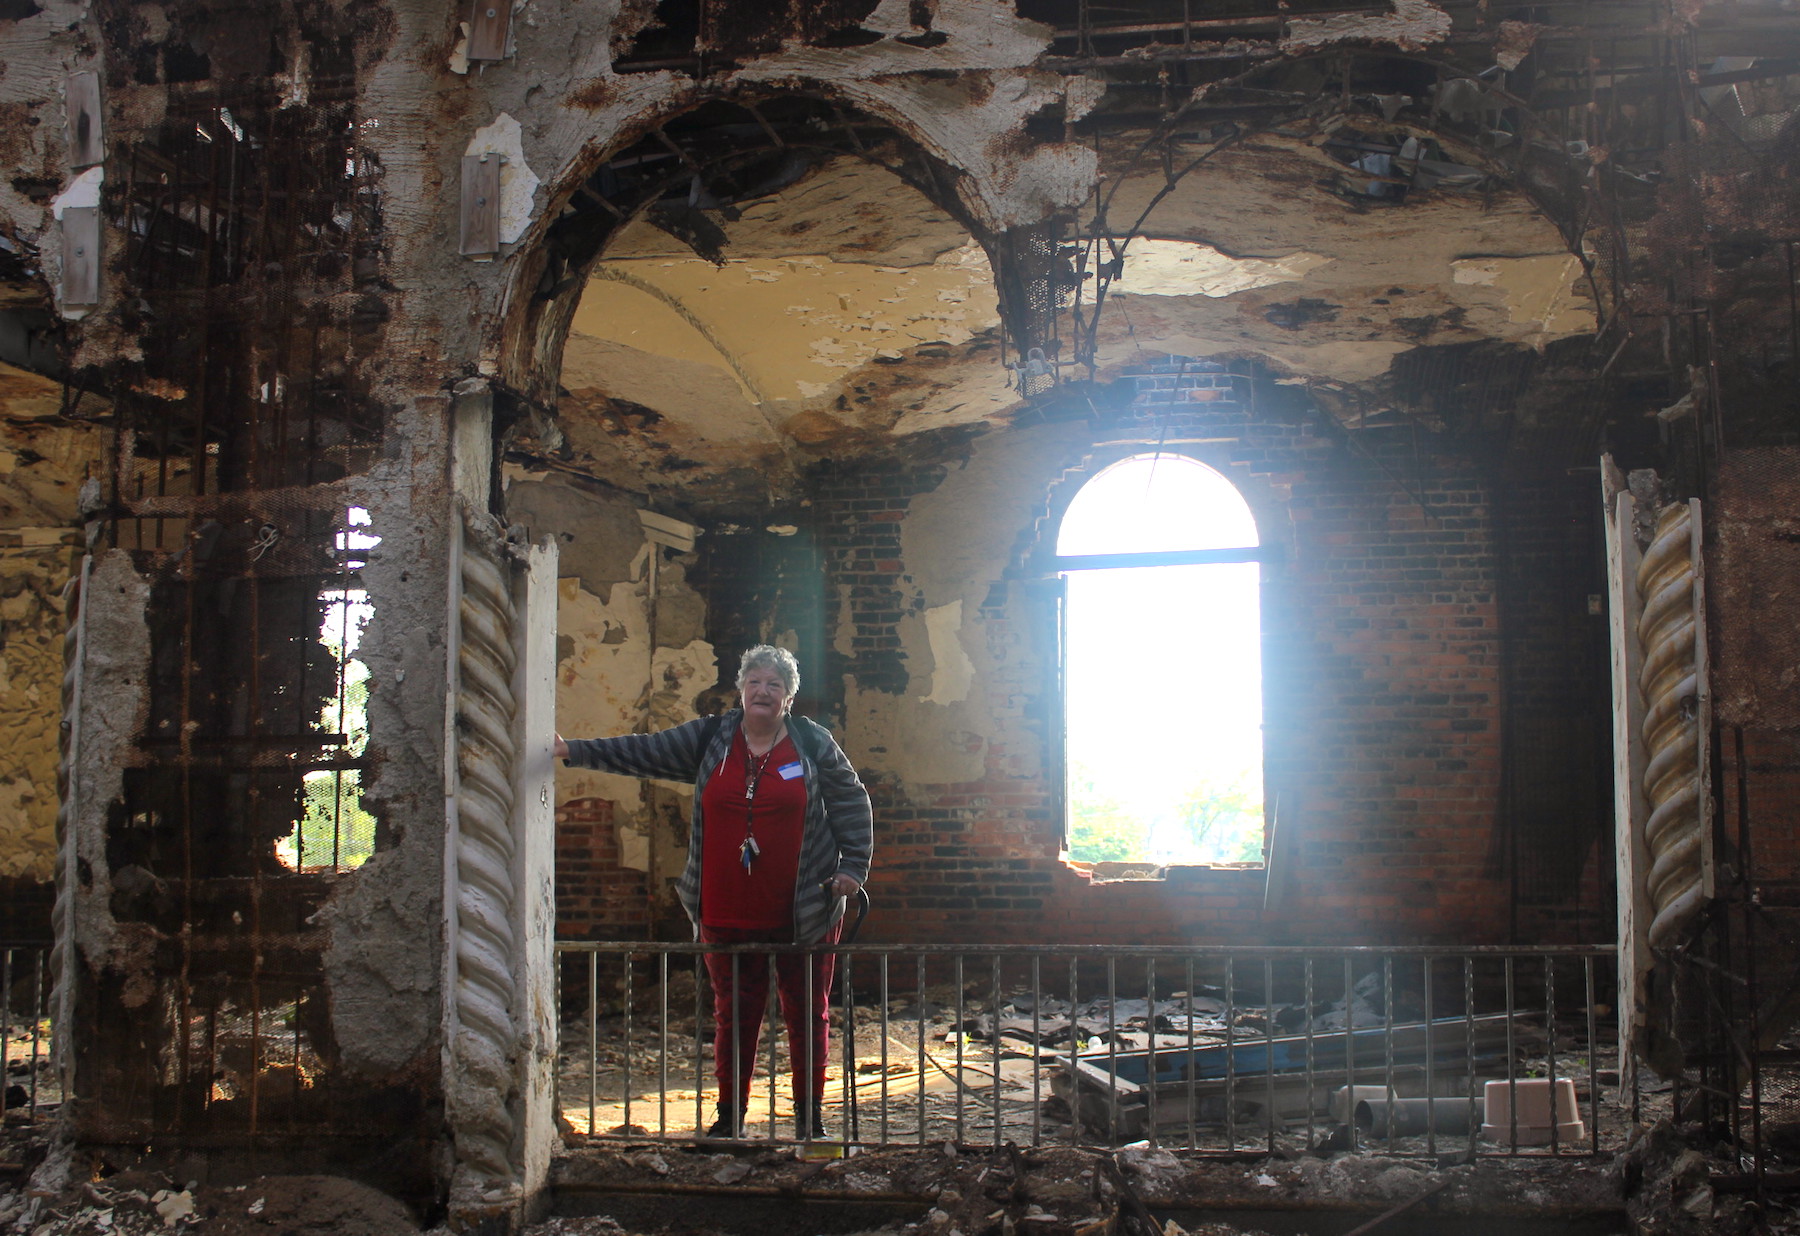 Jeri standing in an old building